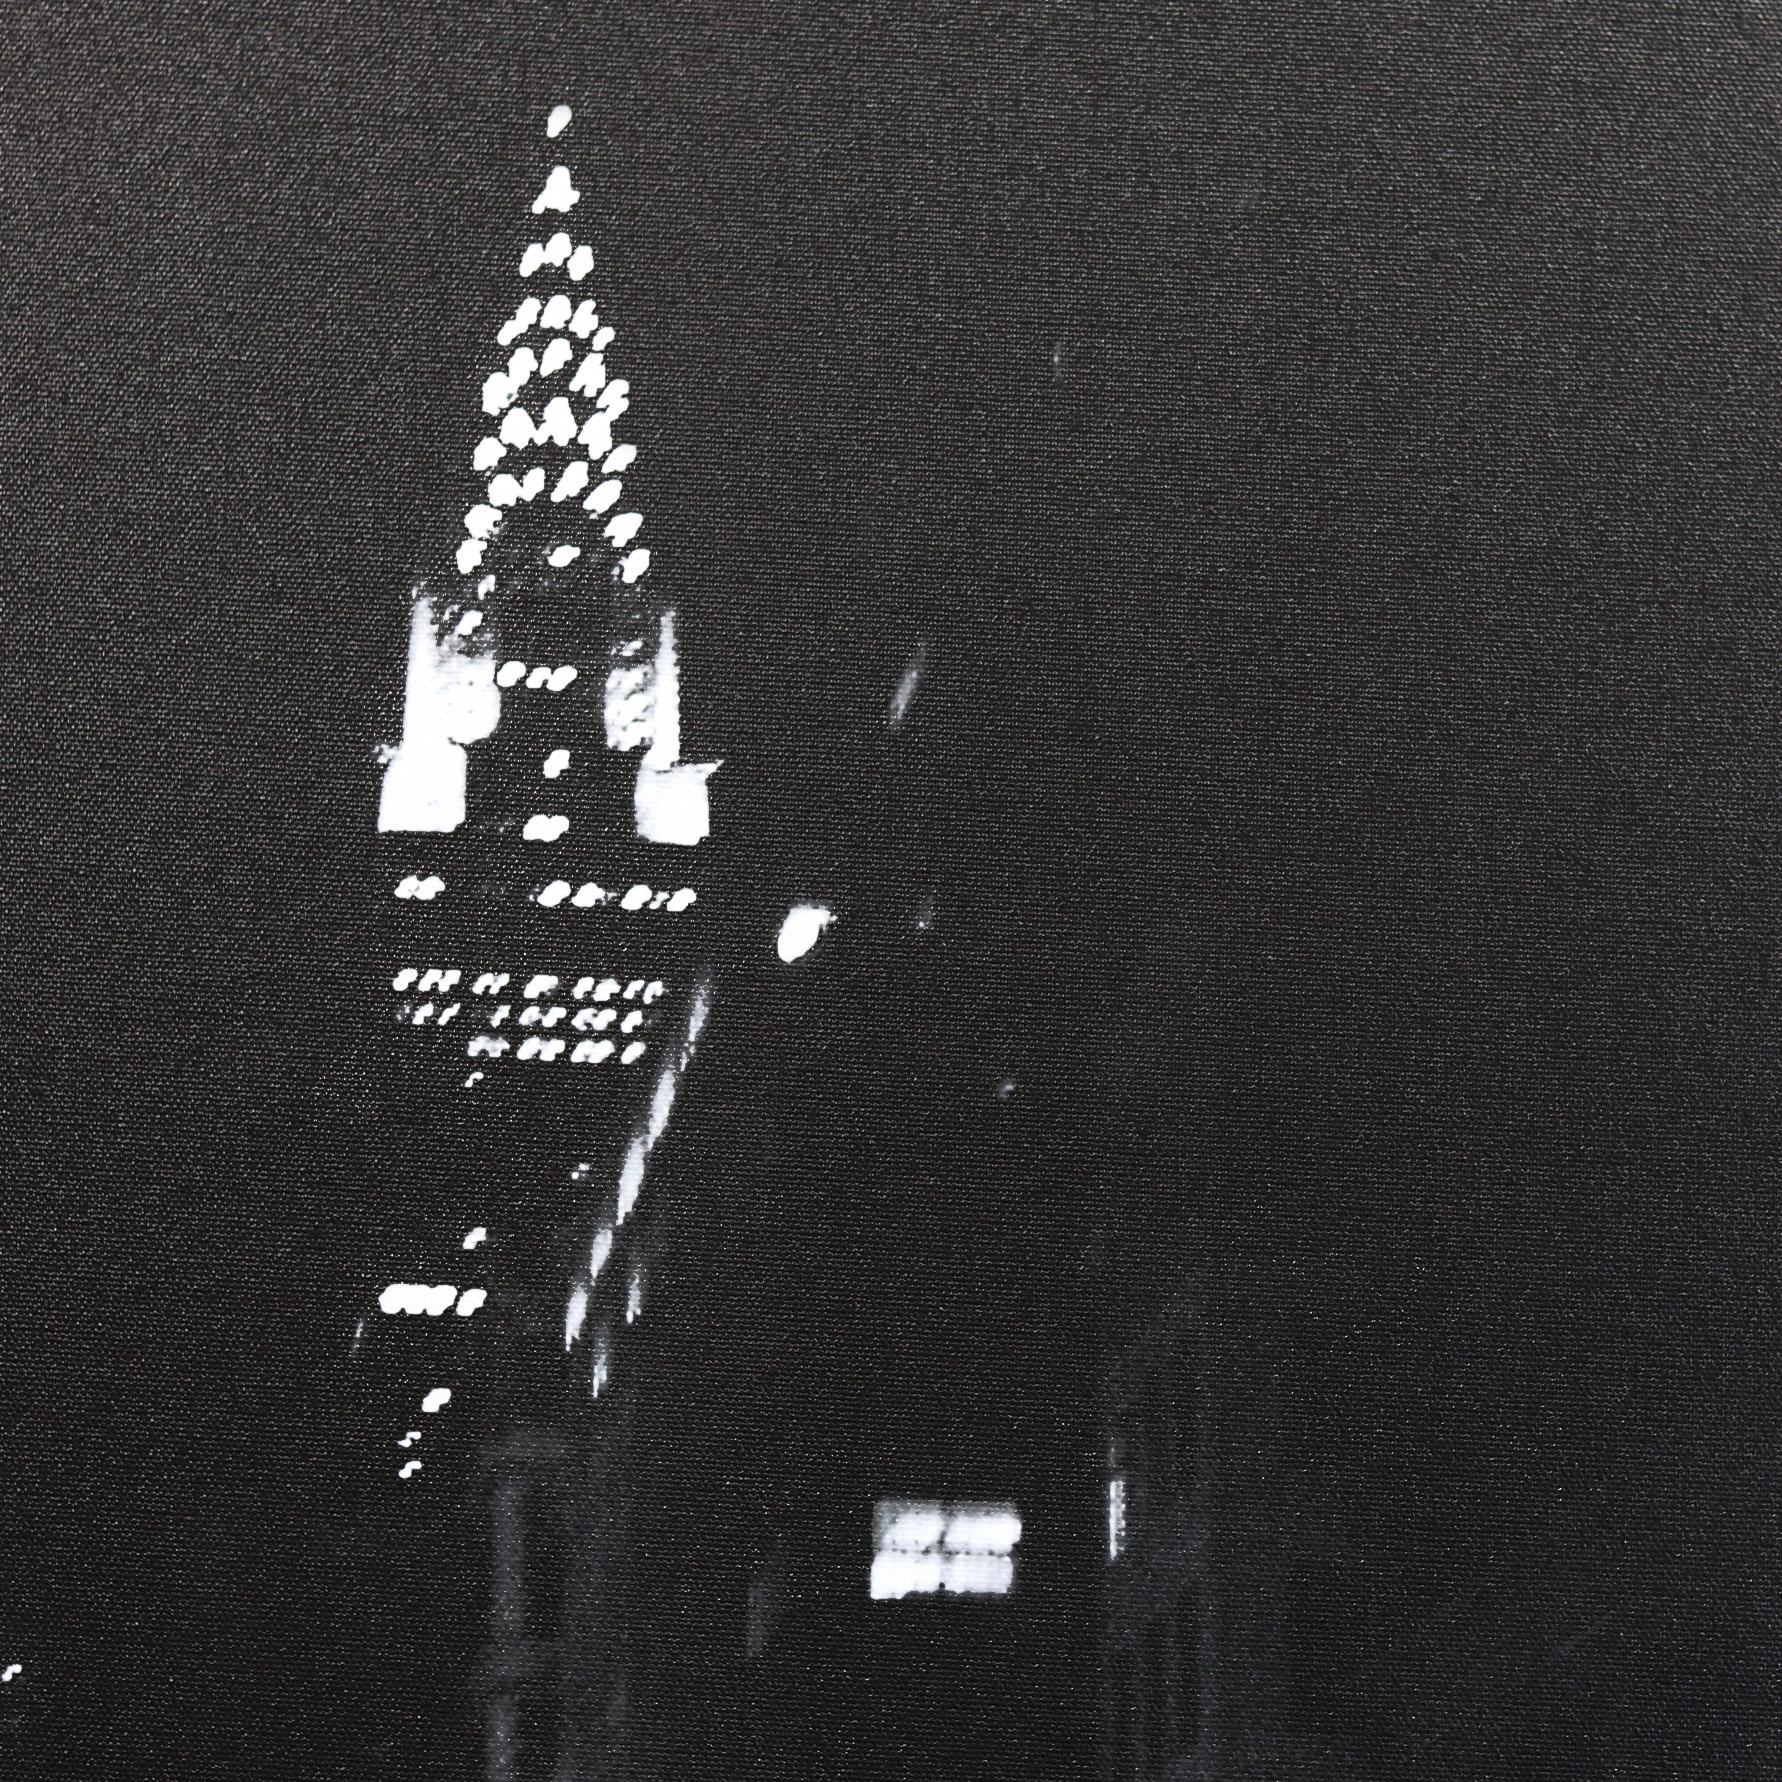 The Chrysler Building II - Black Abstract Painting by Pete Kasprzak